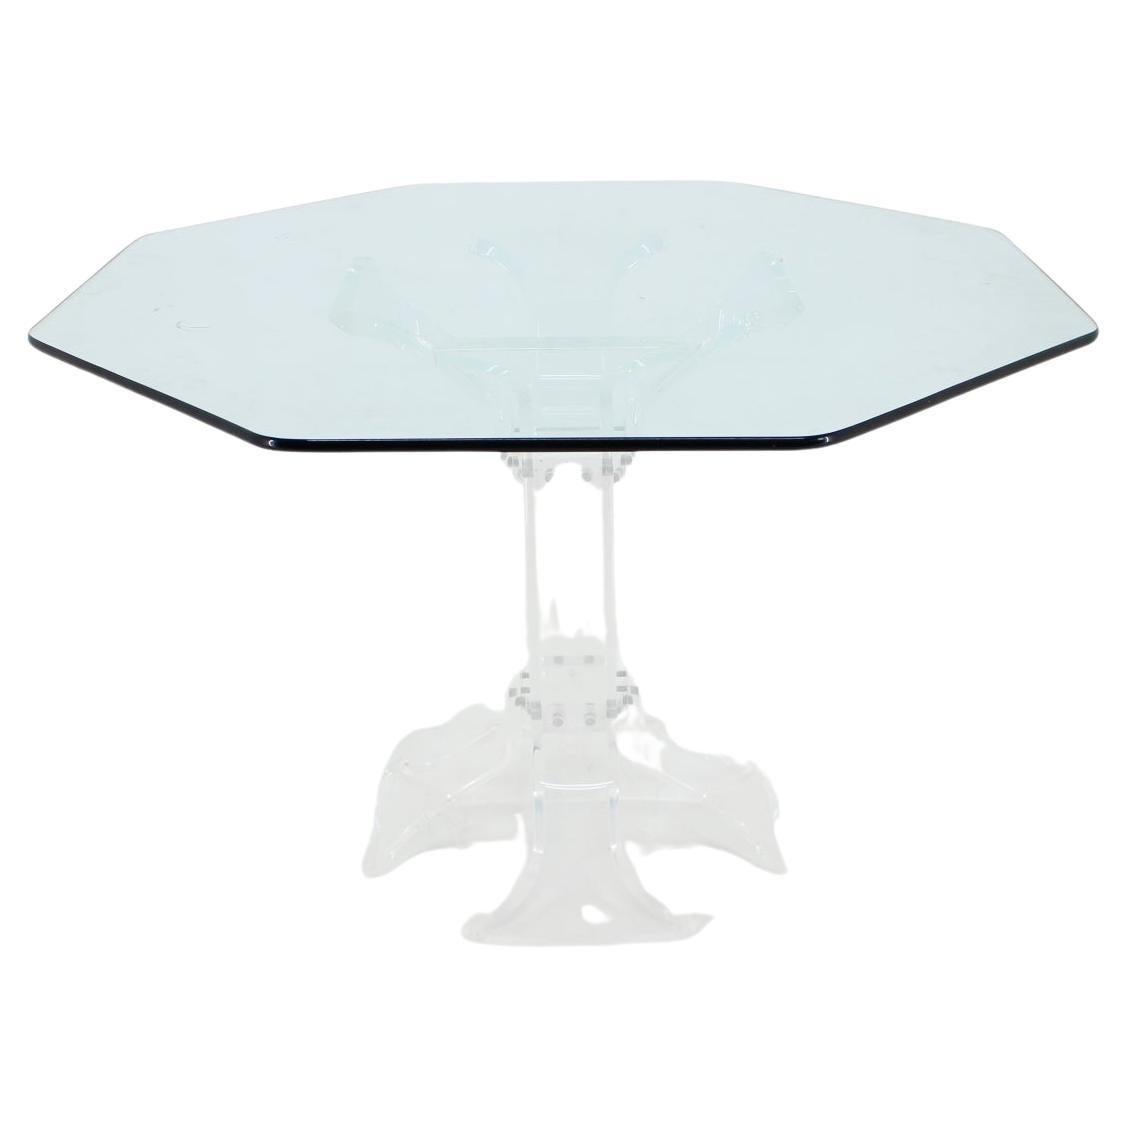 1970s Lucite Dining Table with Glass Top, Charles Hollis Jones Style For Sale